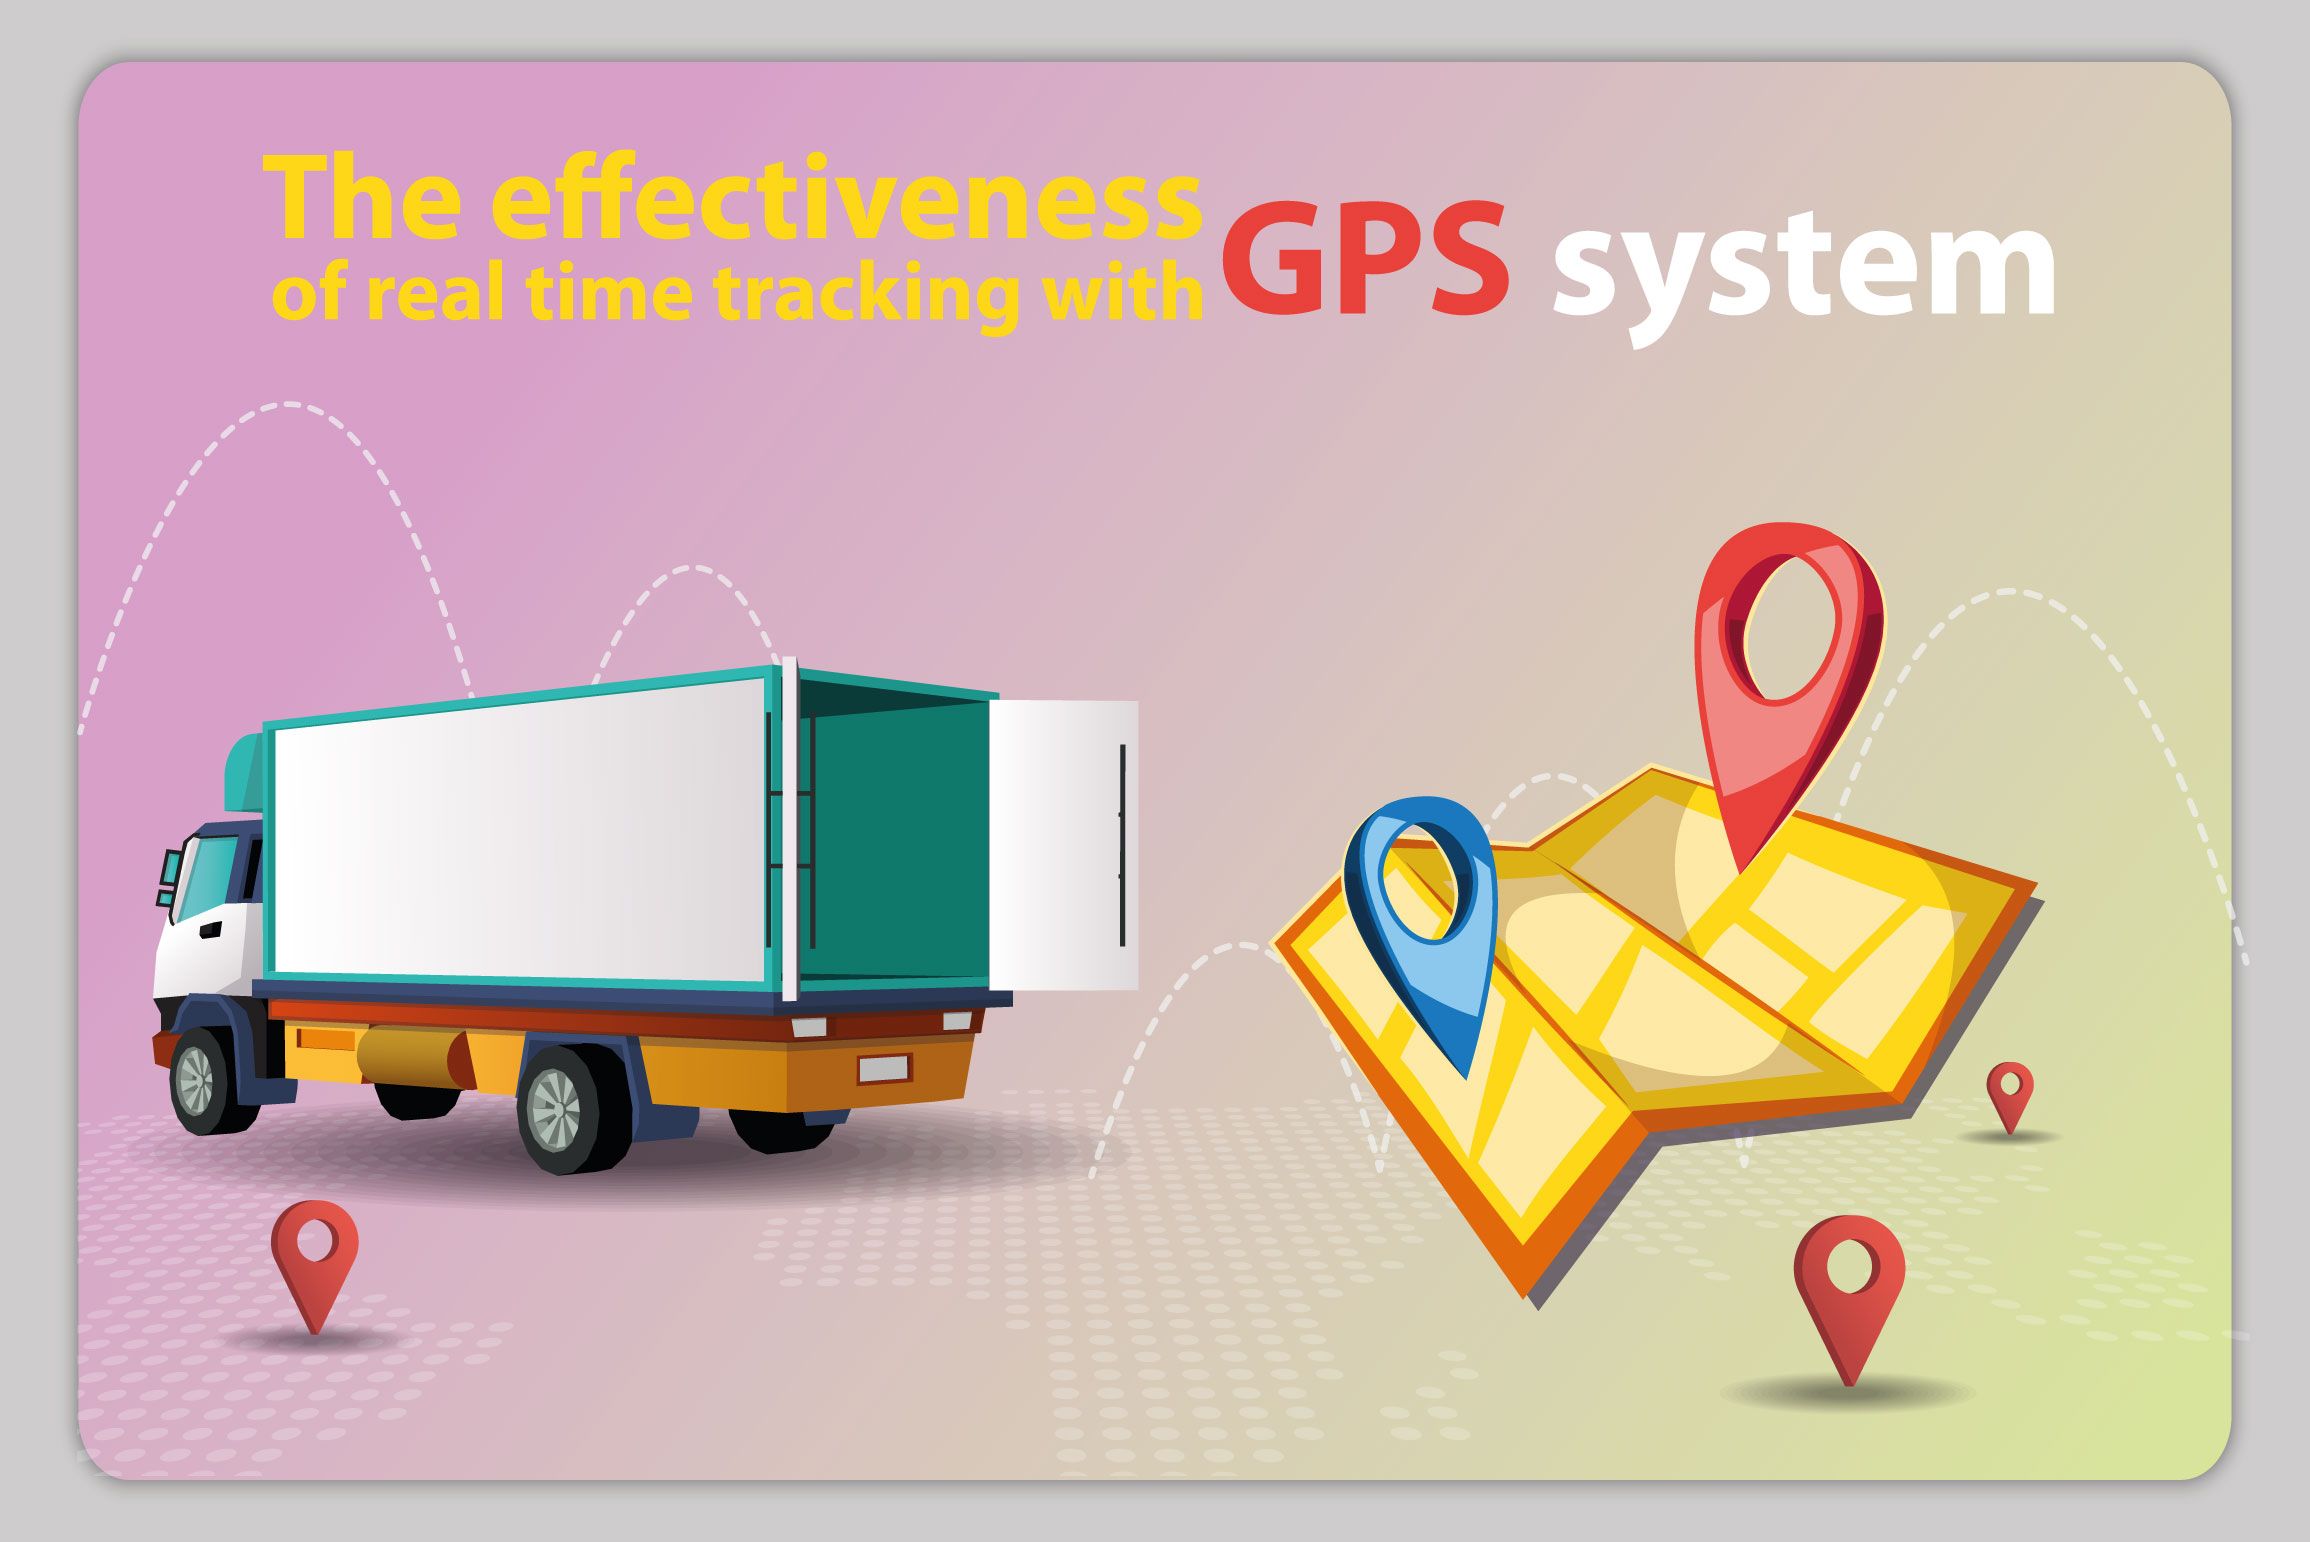 The effectiveness of real time tracking with GPS system